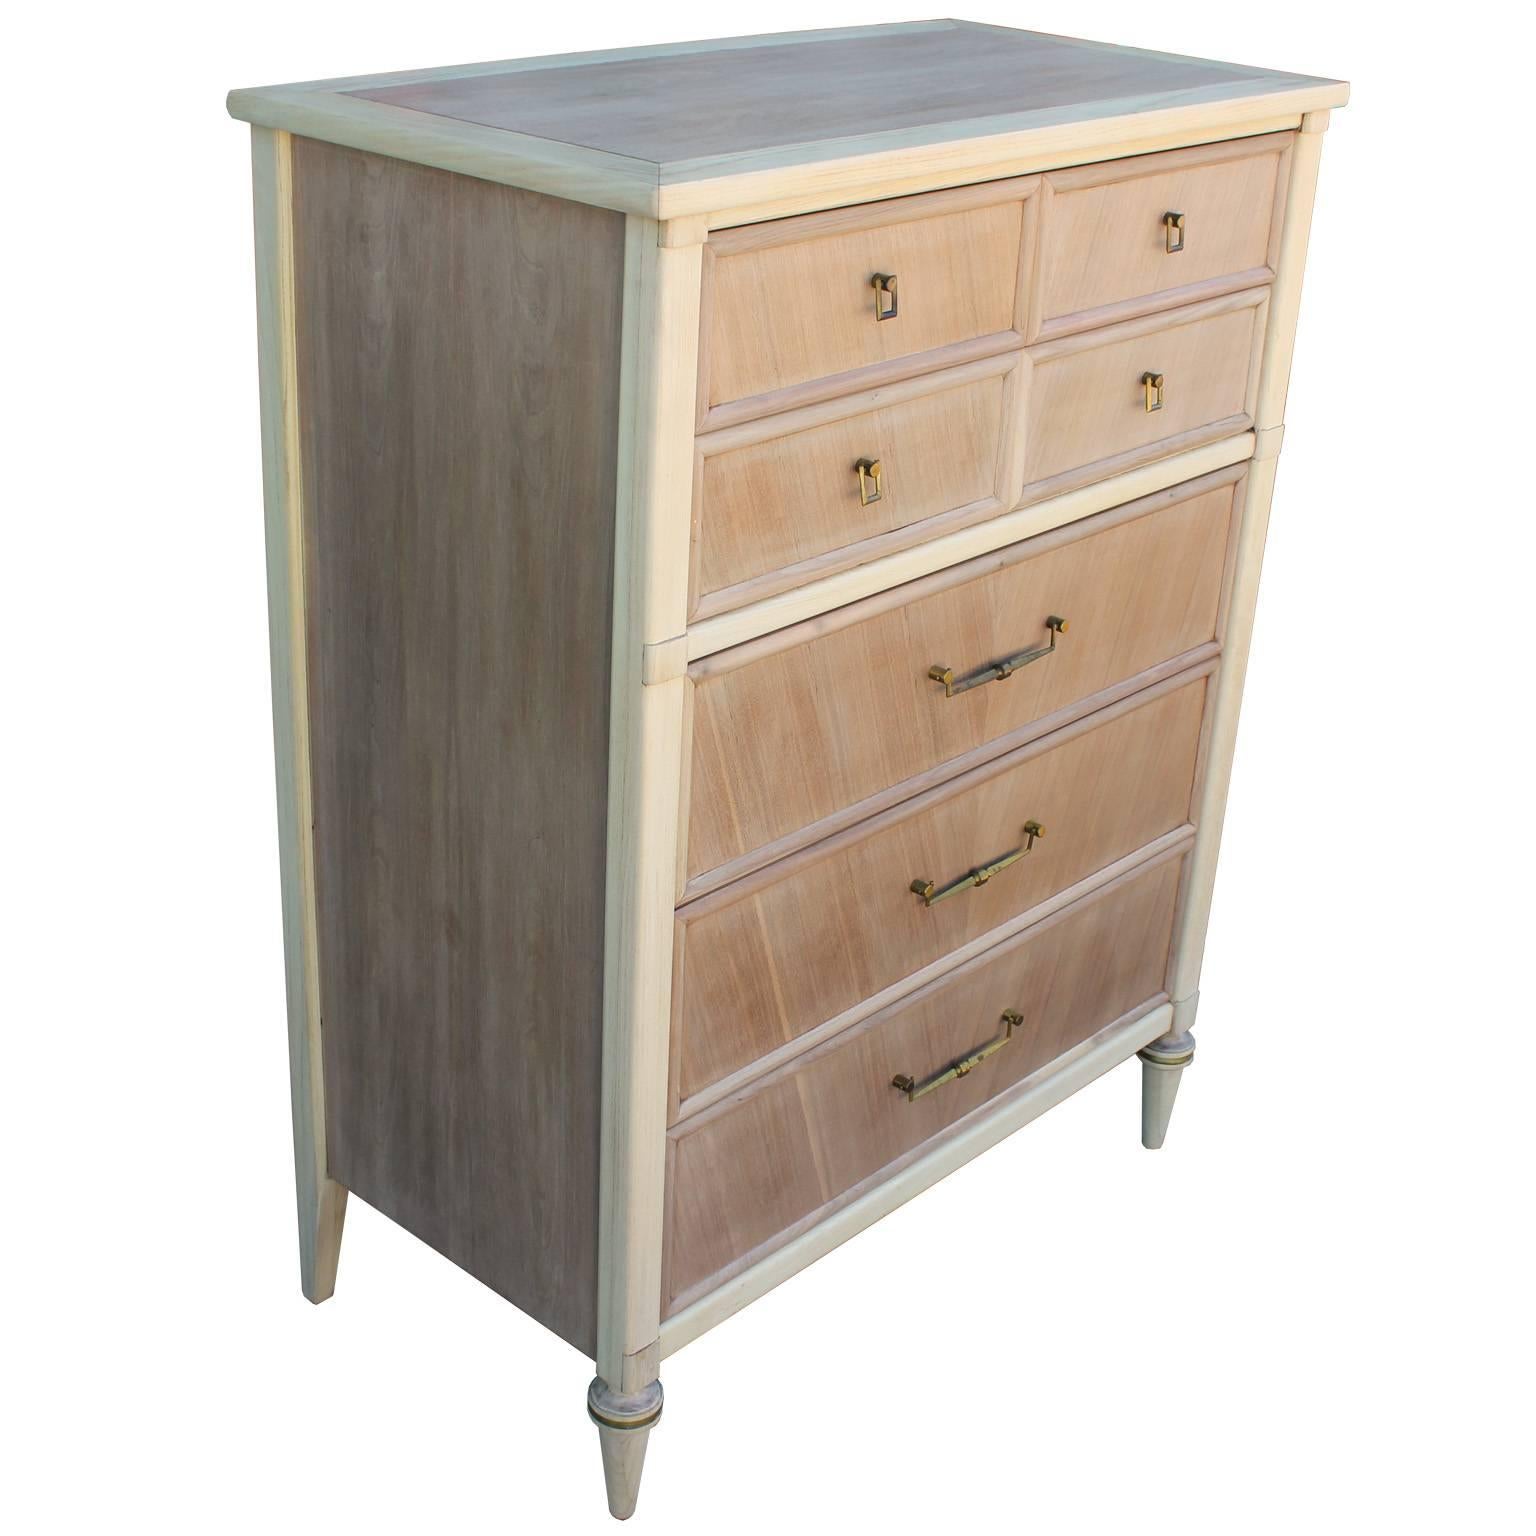 Glamorous two-tone, bleached dresser. Dresser has turned legs and beautiful details. Brass Accents complete the piece. Five drawers provide excellent storage. Stunning from all angles.